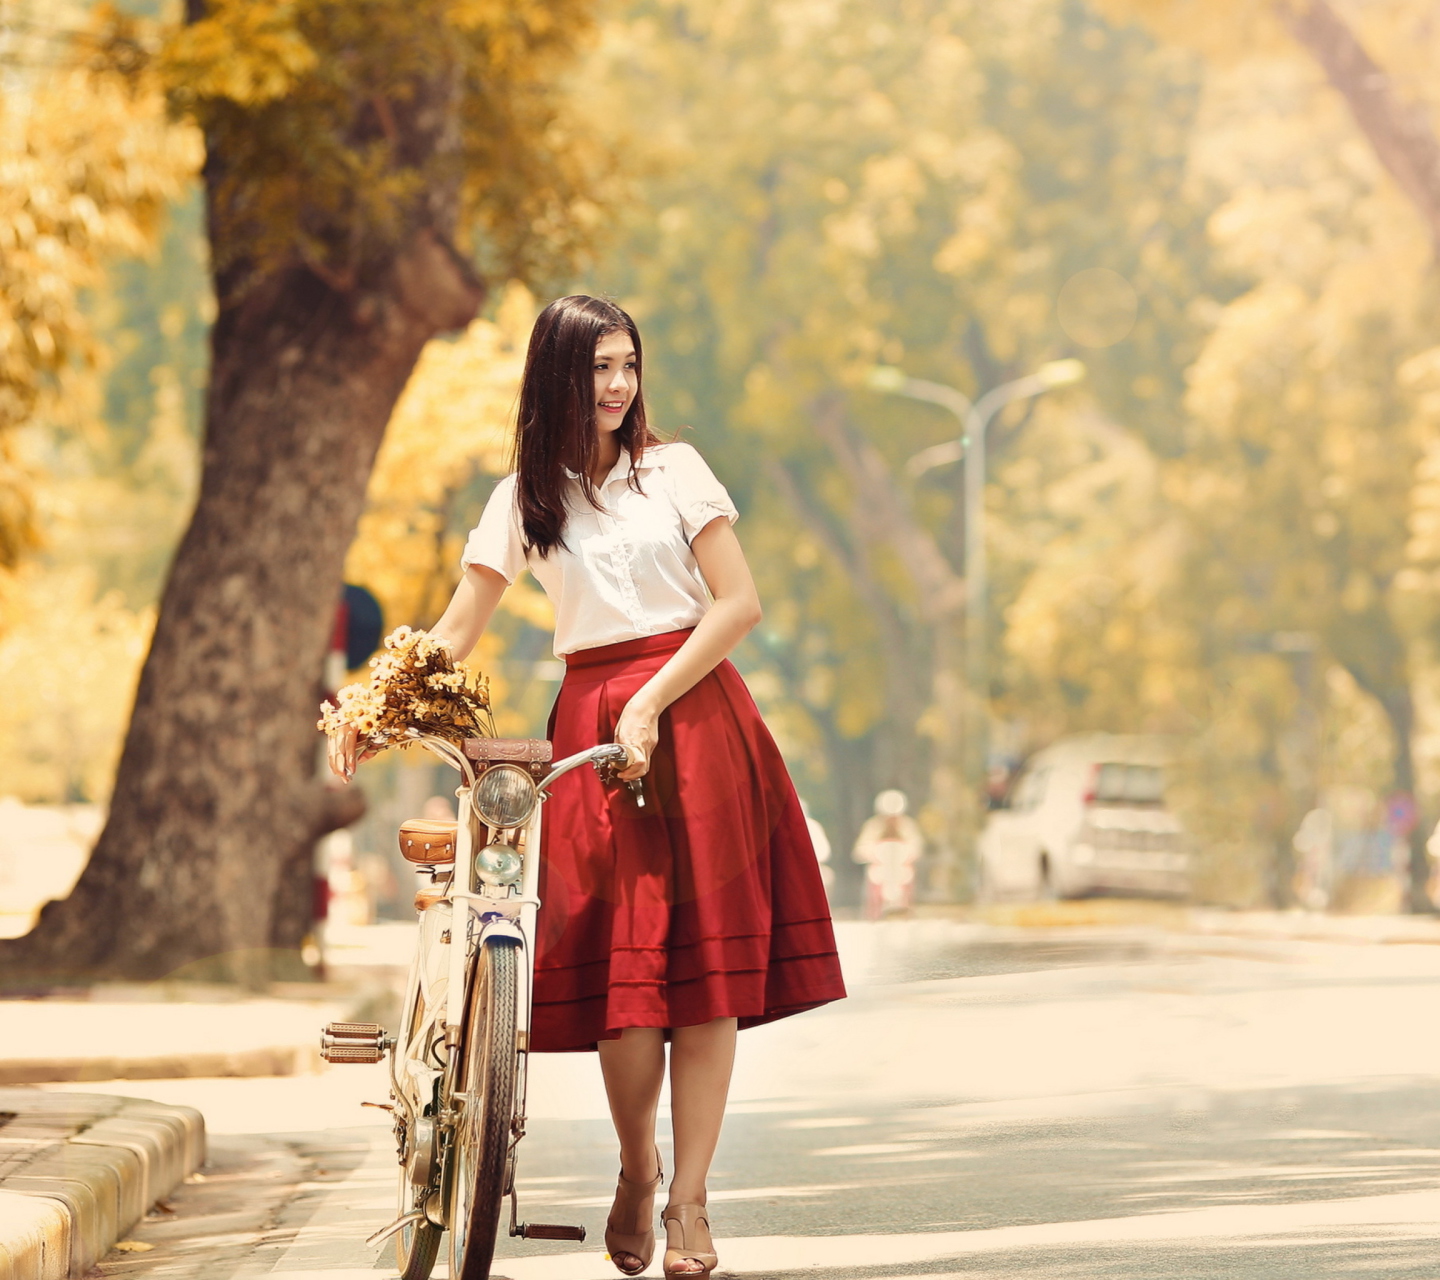 Fondo de pantalla Romantic Girl With Bicycle And Flowers 1440x1280